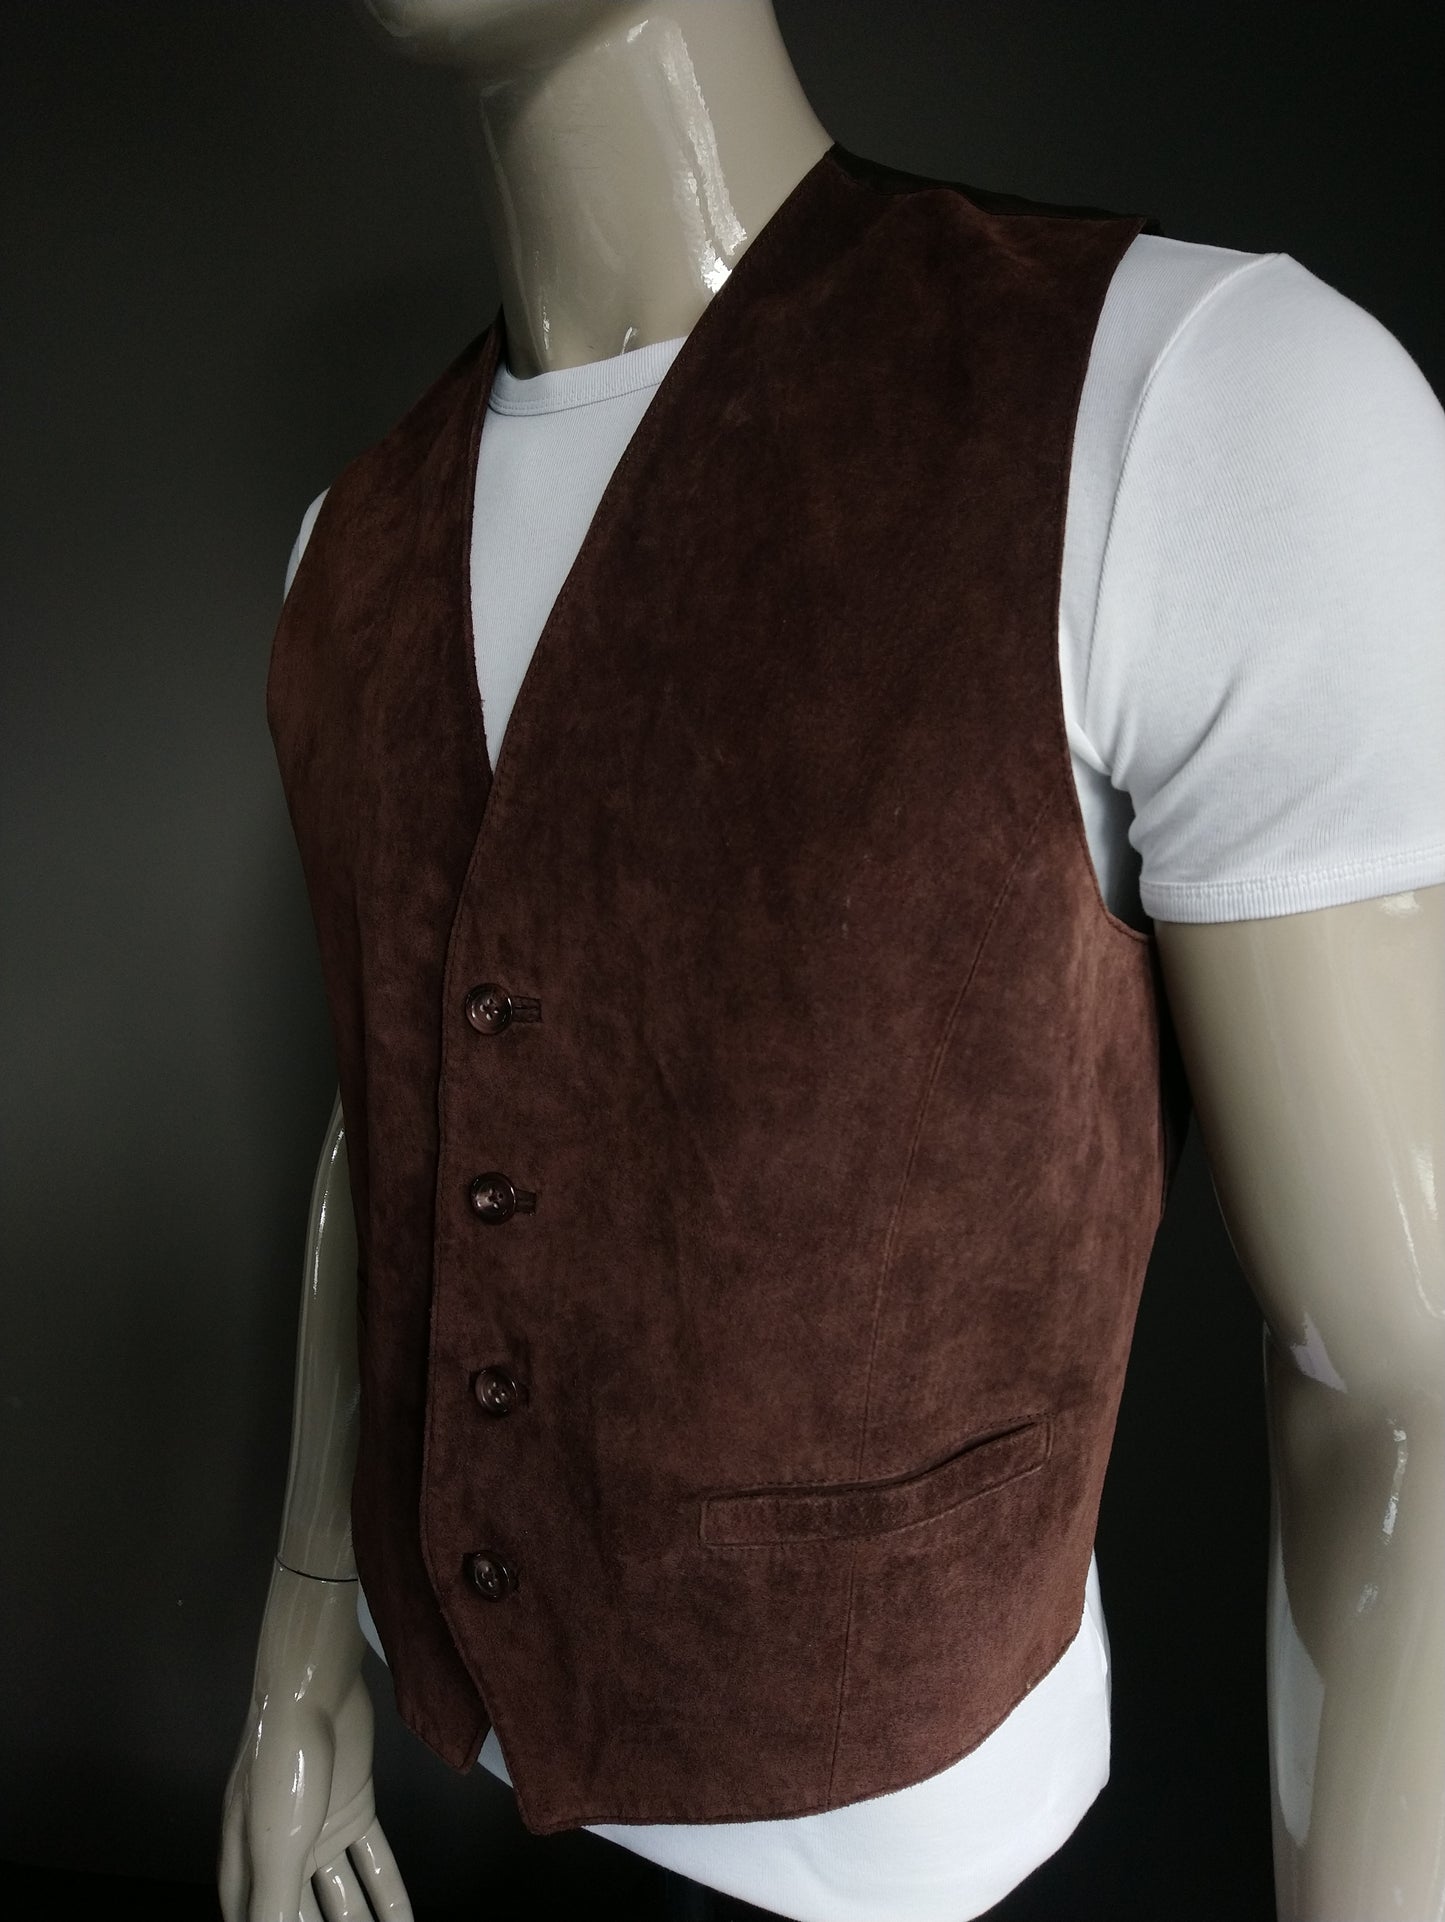 Pork leather waistcoat. Brown colored. Size M. #308.